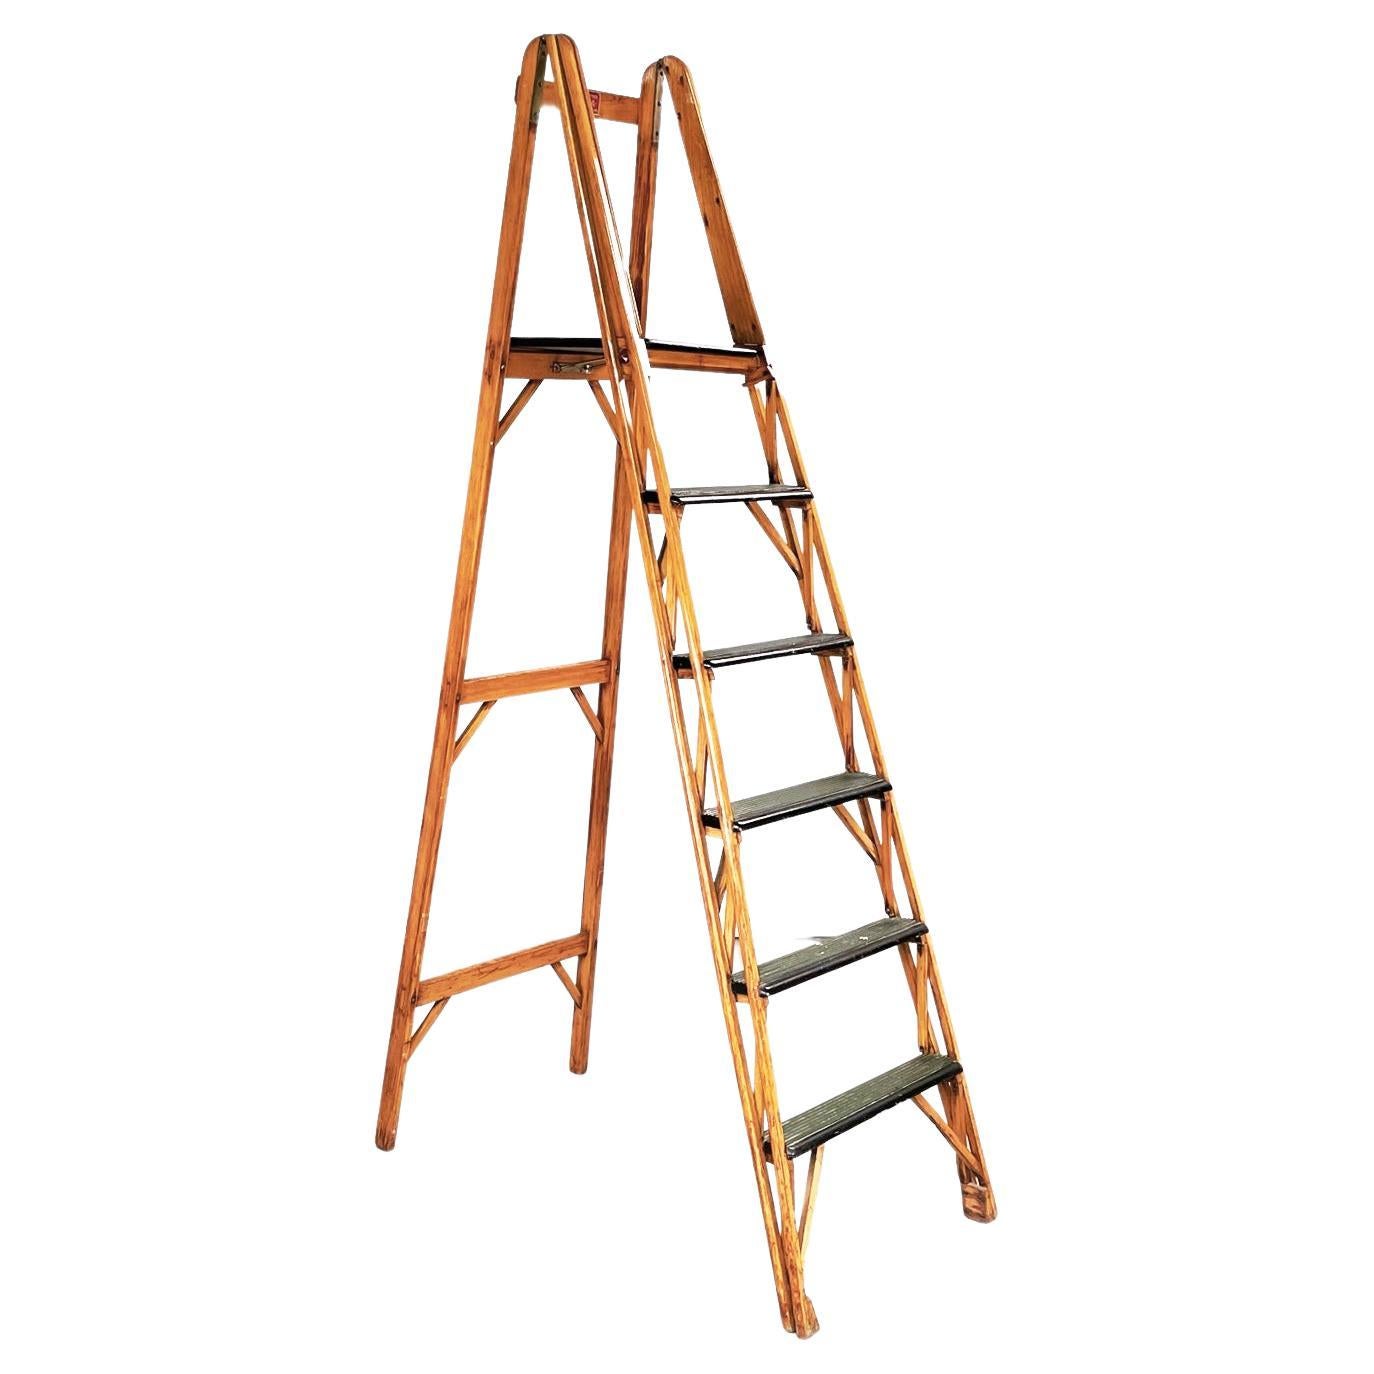 Italian Mid-Century Modern Polished Wooden Step Ladder Stair by Scorta, 1950s